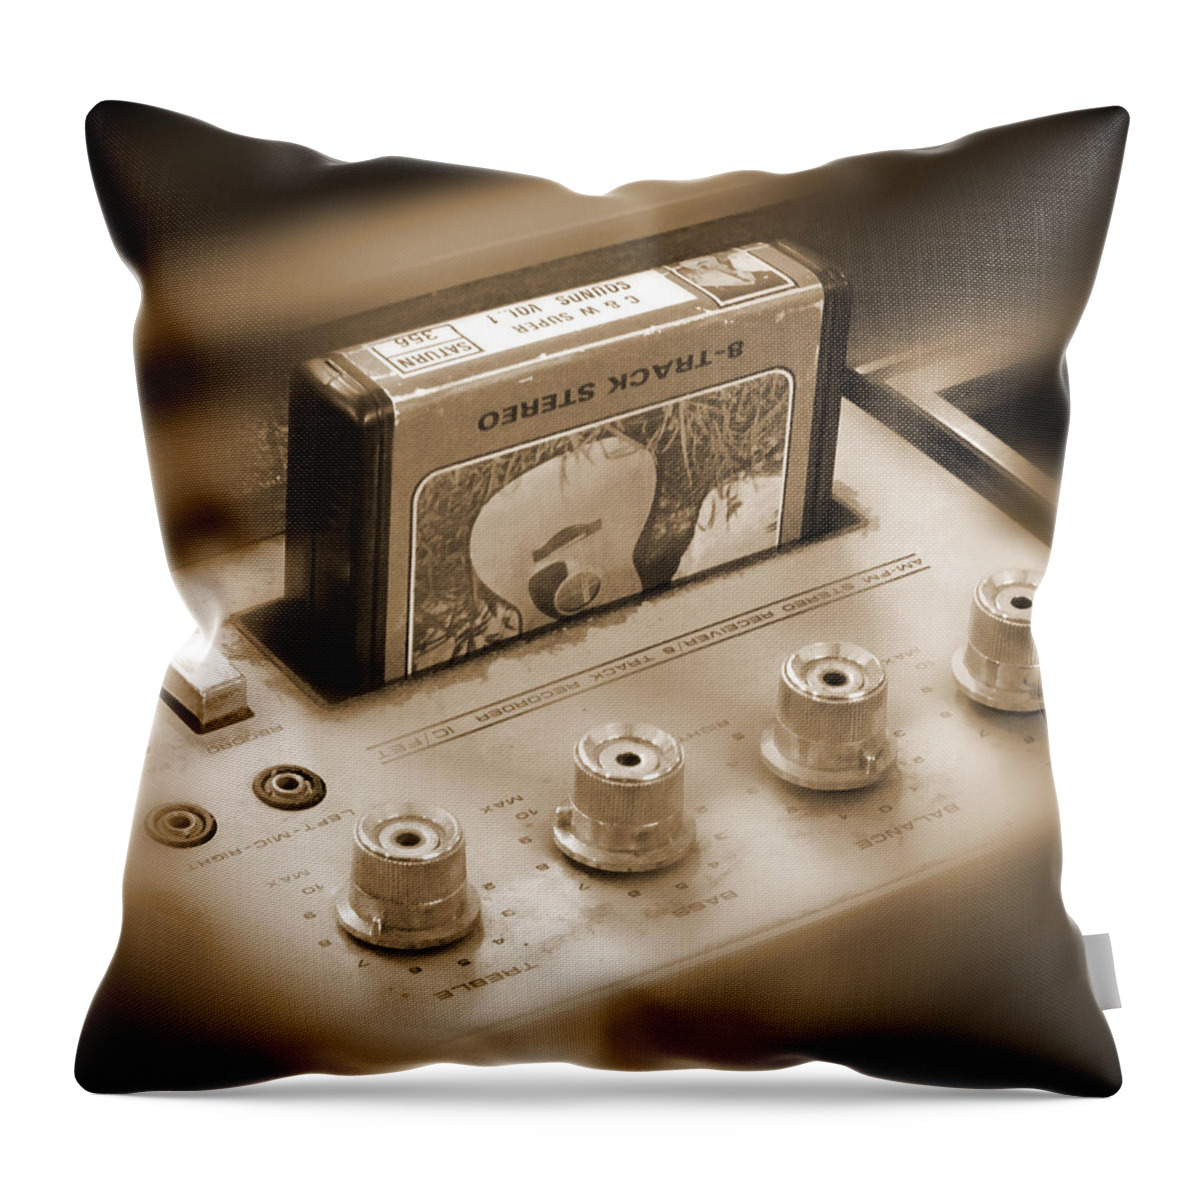 8-track Tape Player Throw Pillow featuring the photograph 8-Track Tape Player by Mike McGlothlen